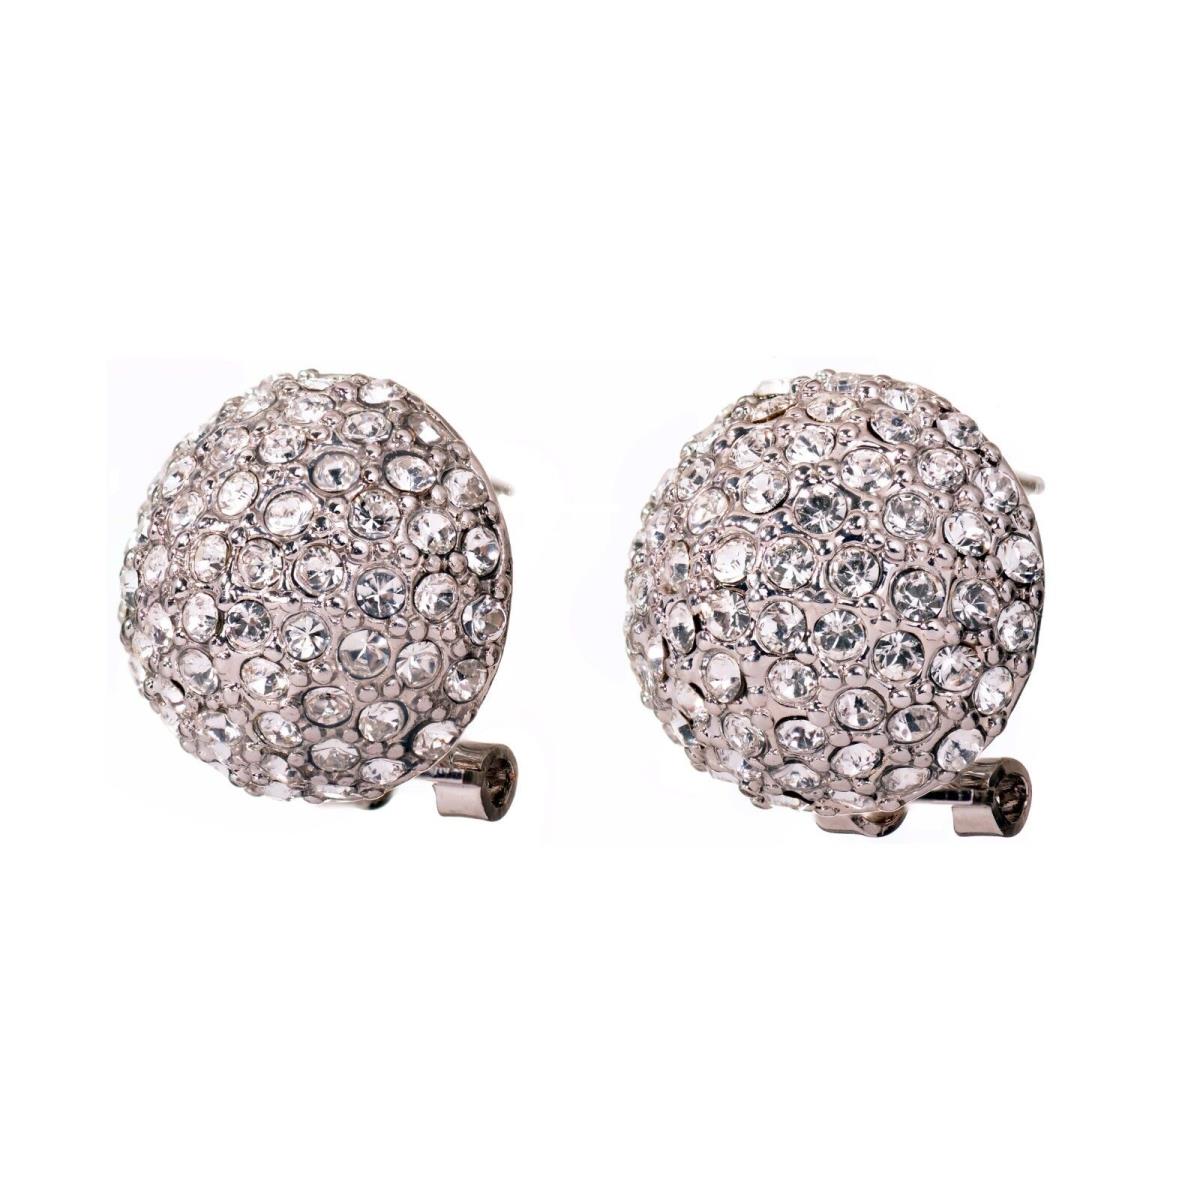 Crystals From Swarovski Lucky Half Ball Earrings Rhodium Plated 7953s